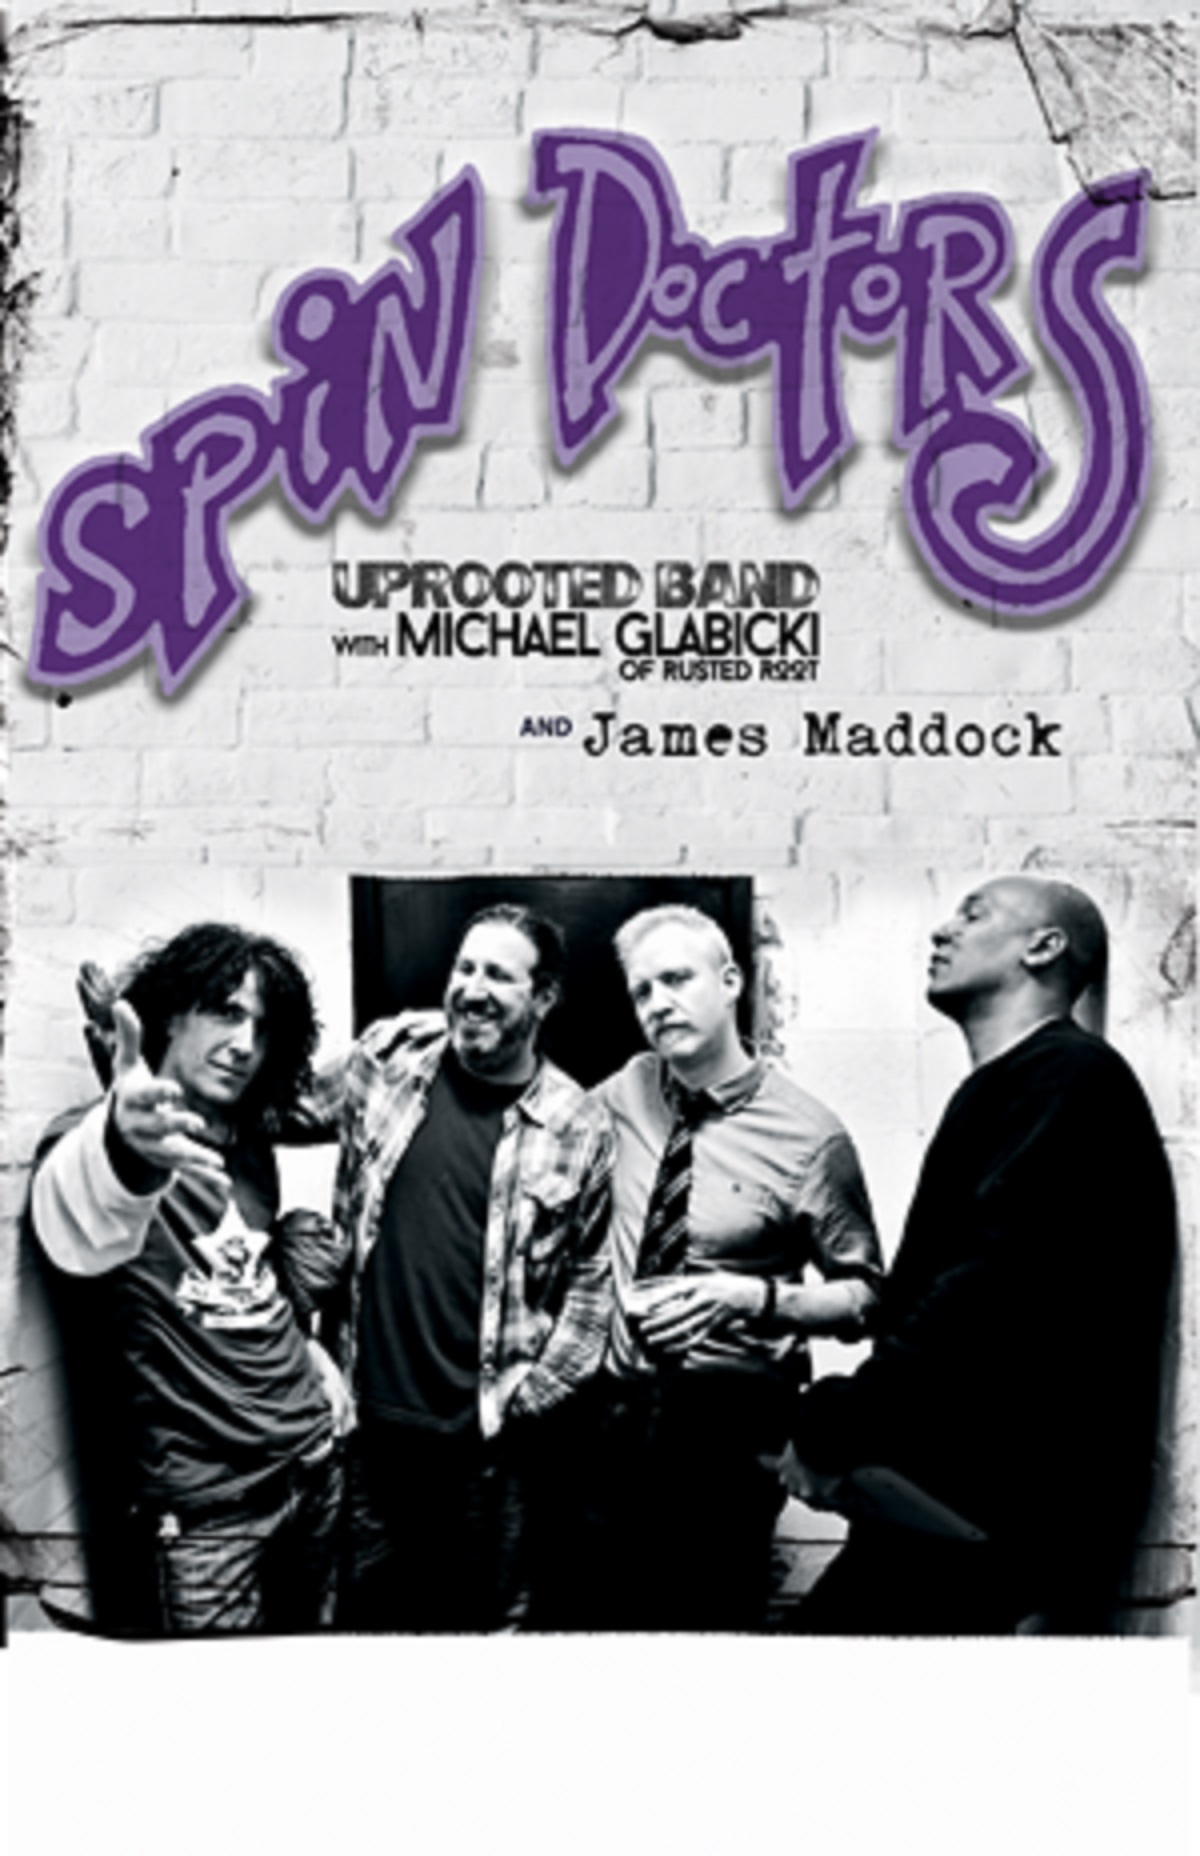 Spin Doctors, Take the Stage at the Wellmont Theater, Jan. 24